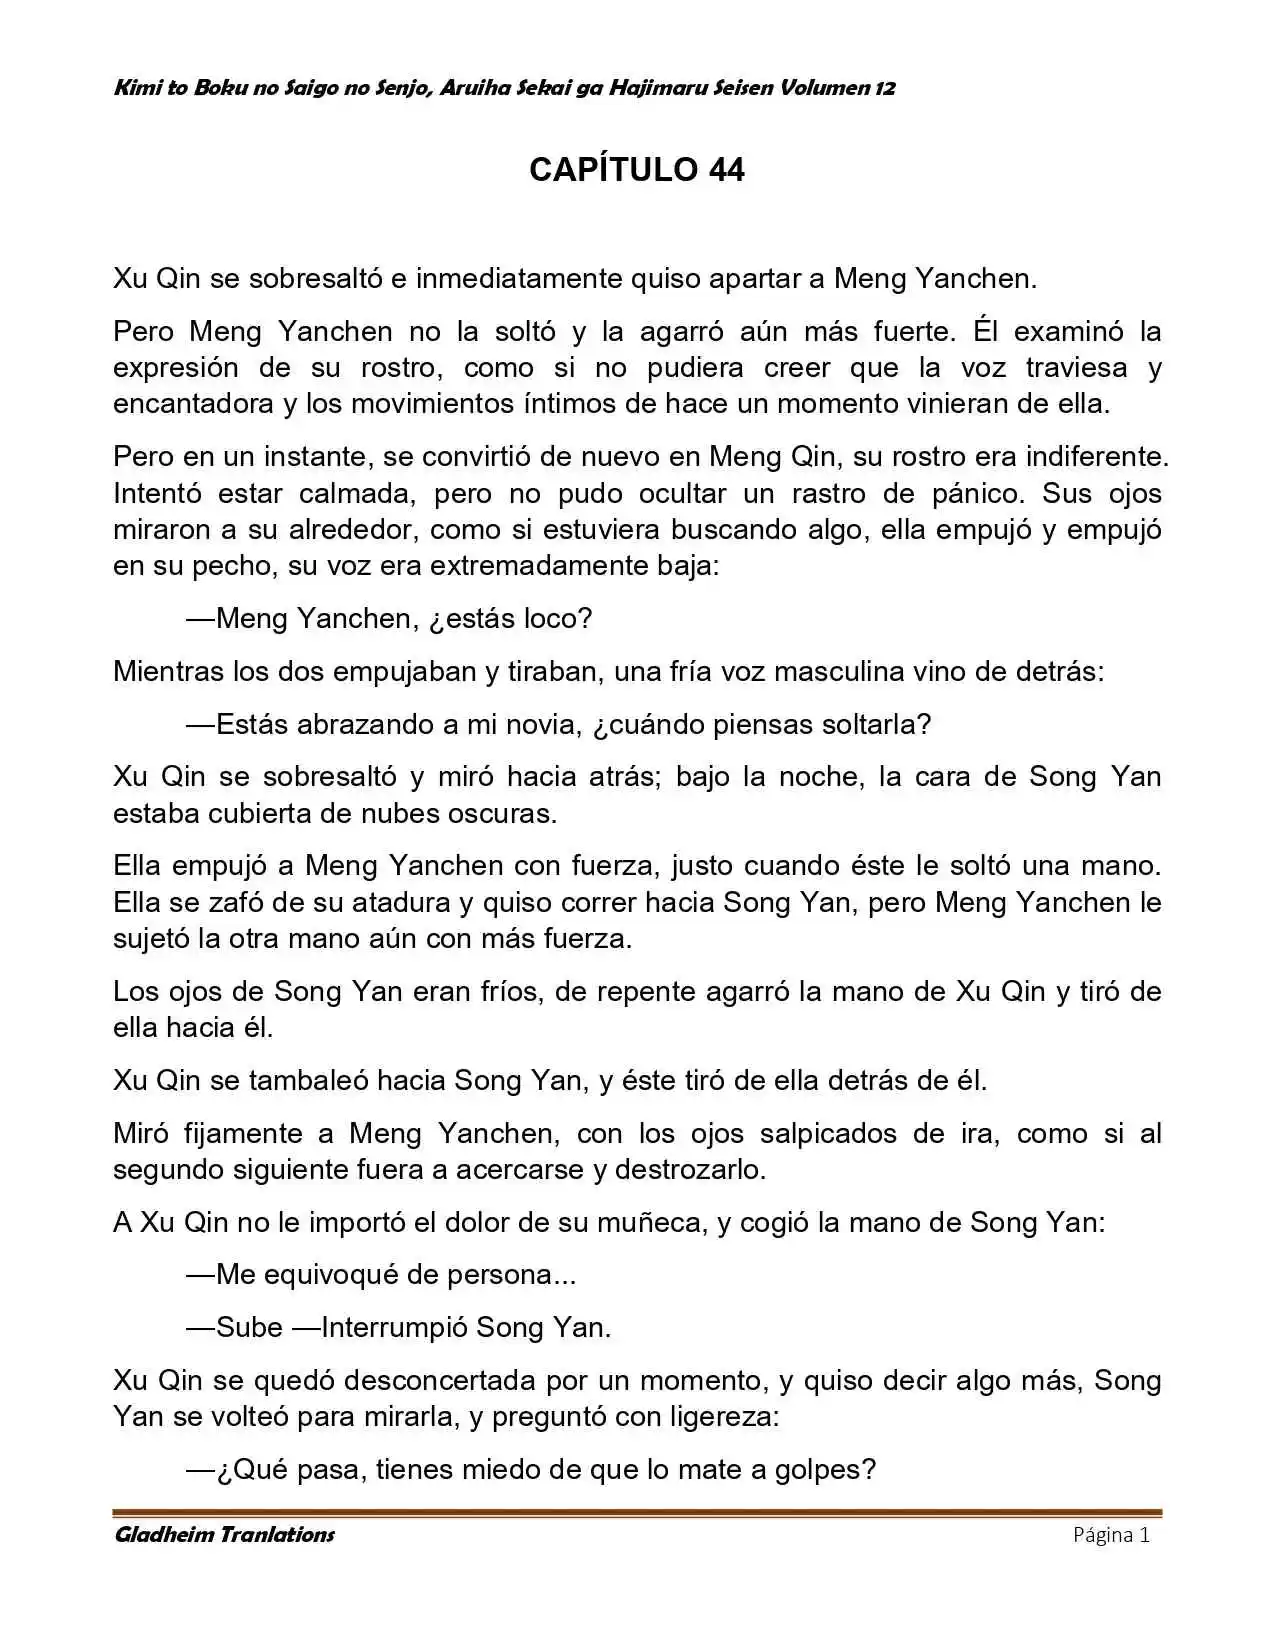 Waiting For You In My City (Novela: Chapter 44 - Page 1